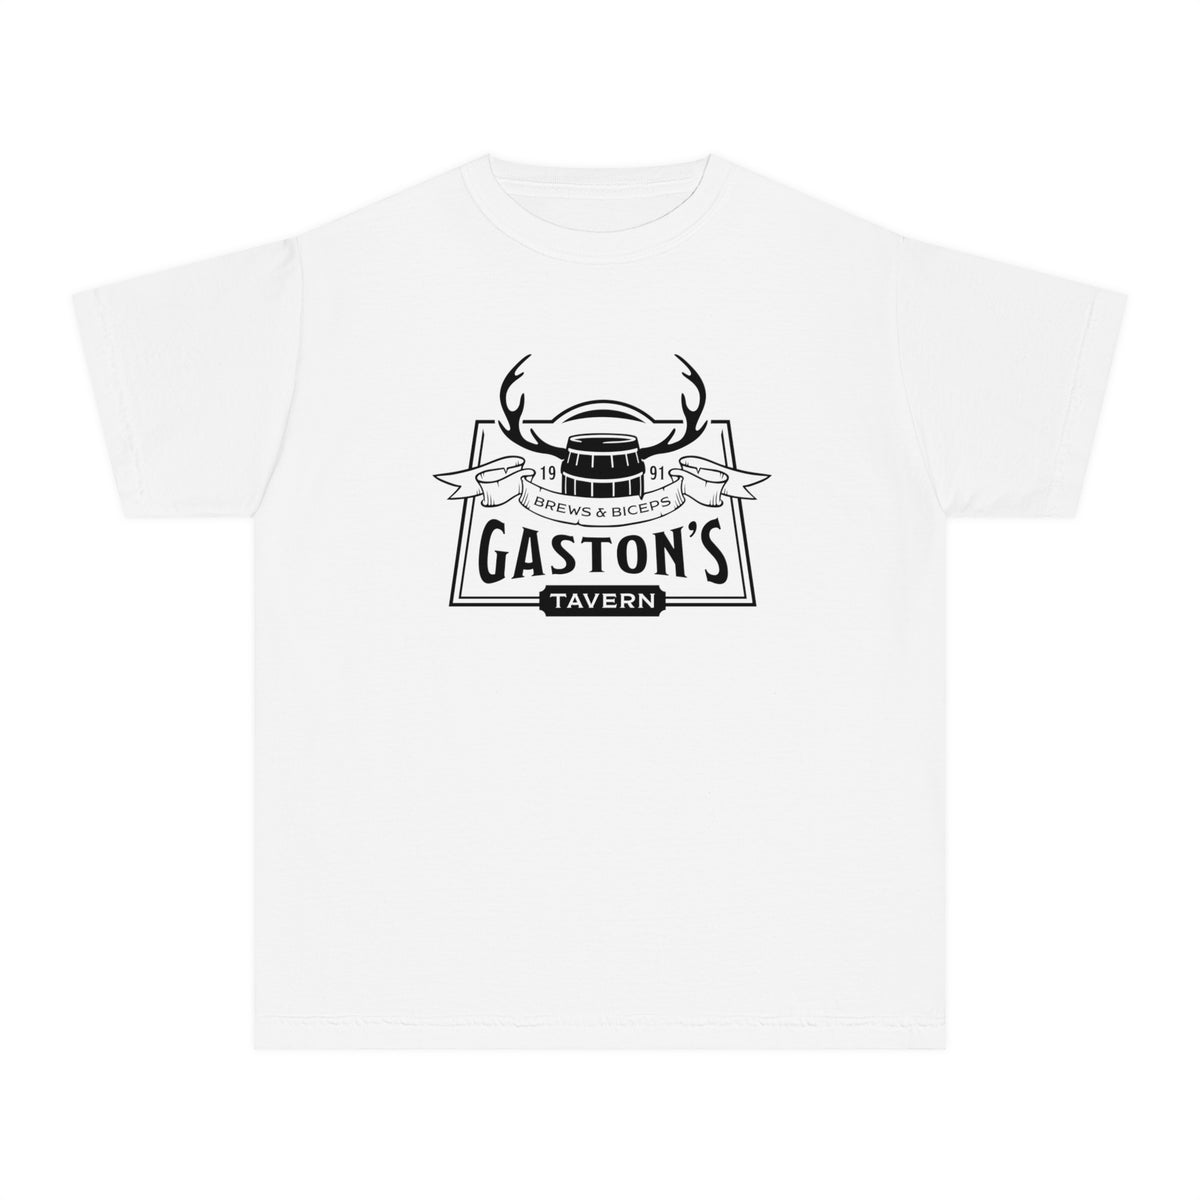 Gaston’s Tavern Comfort Colors Youth Midweight Tee